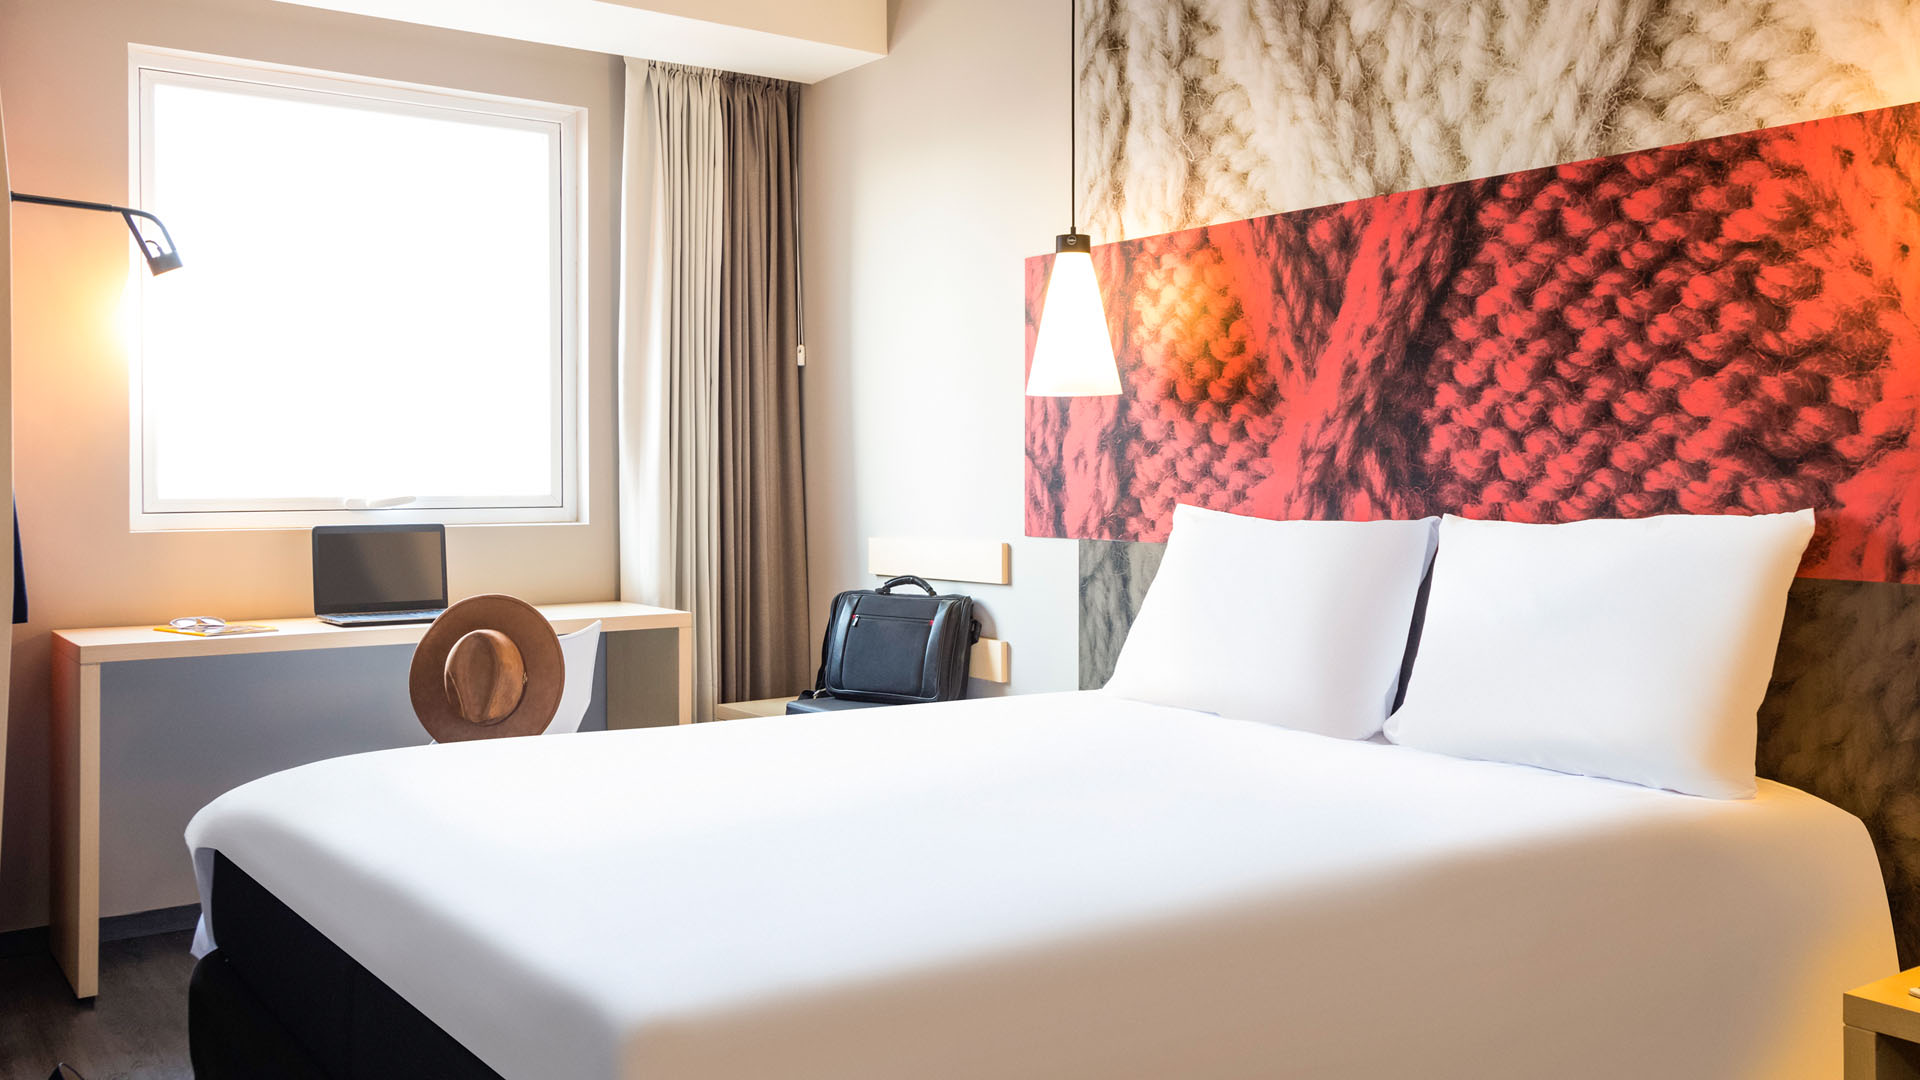 Book A Cheap Hotel With Ibis All Our Hotels